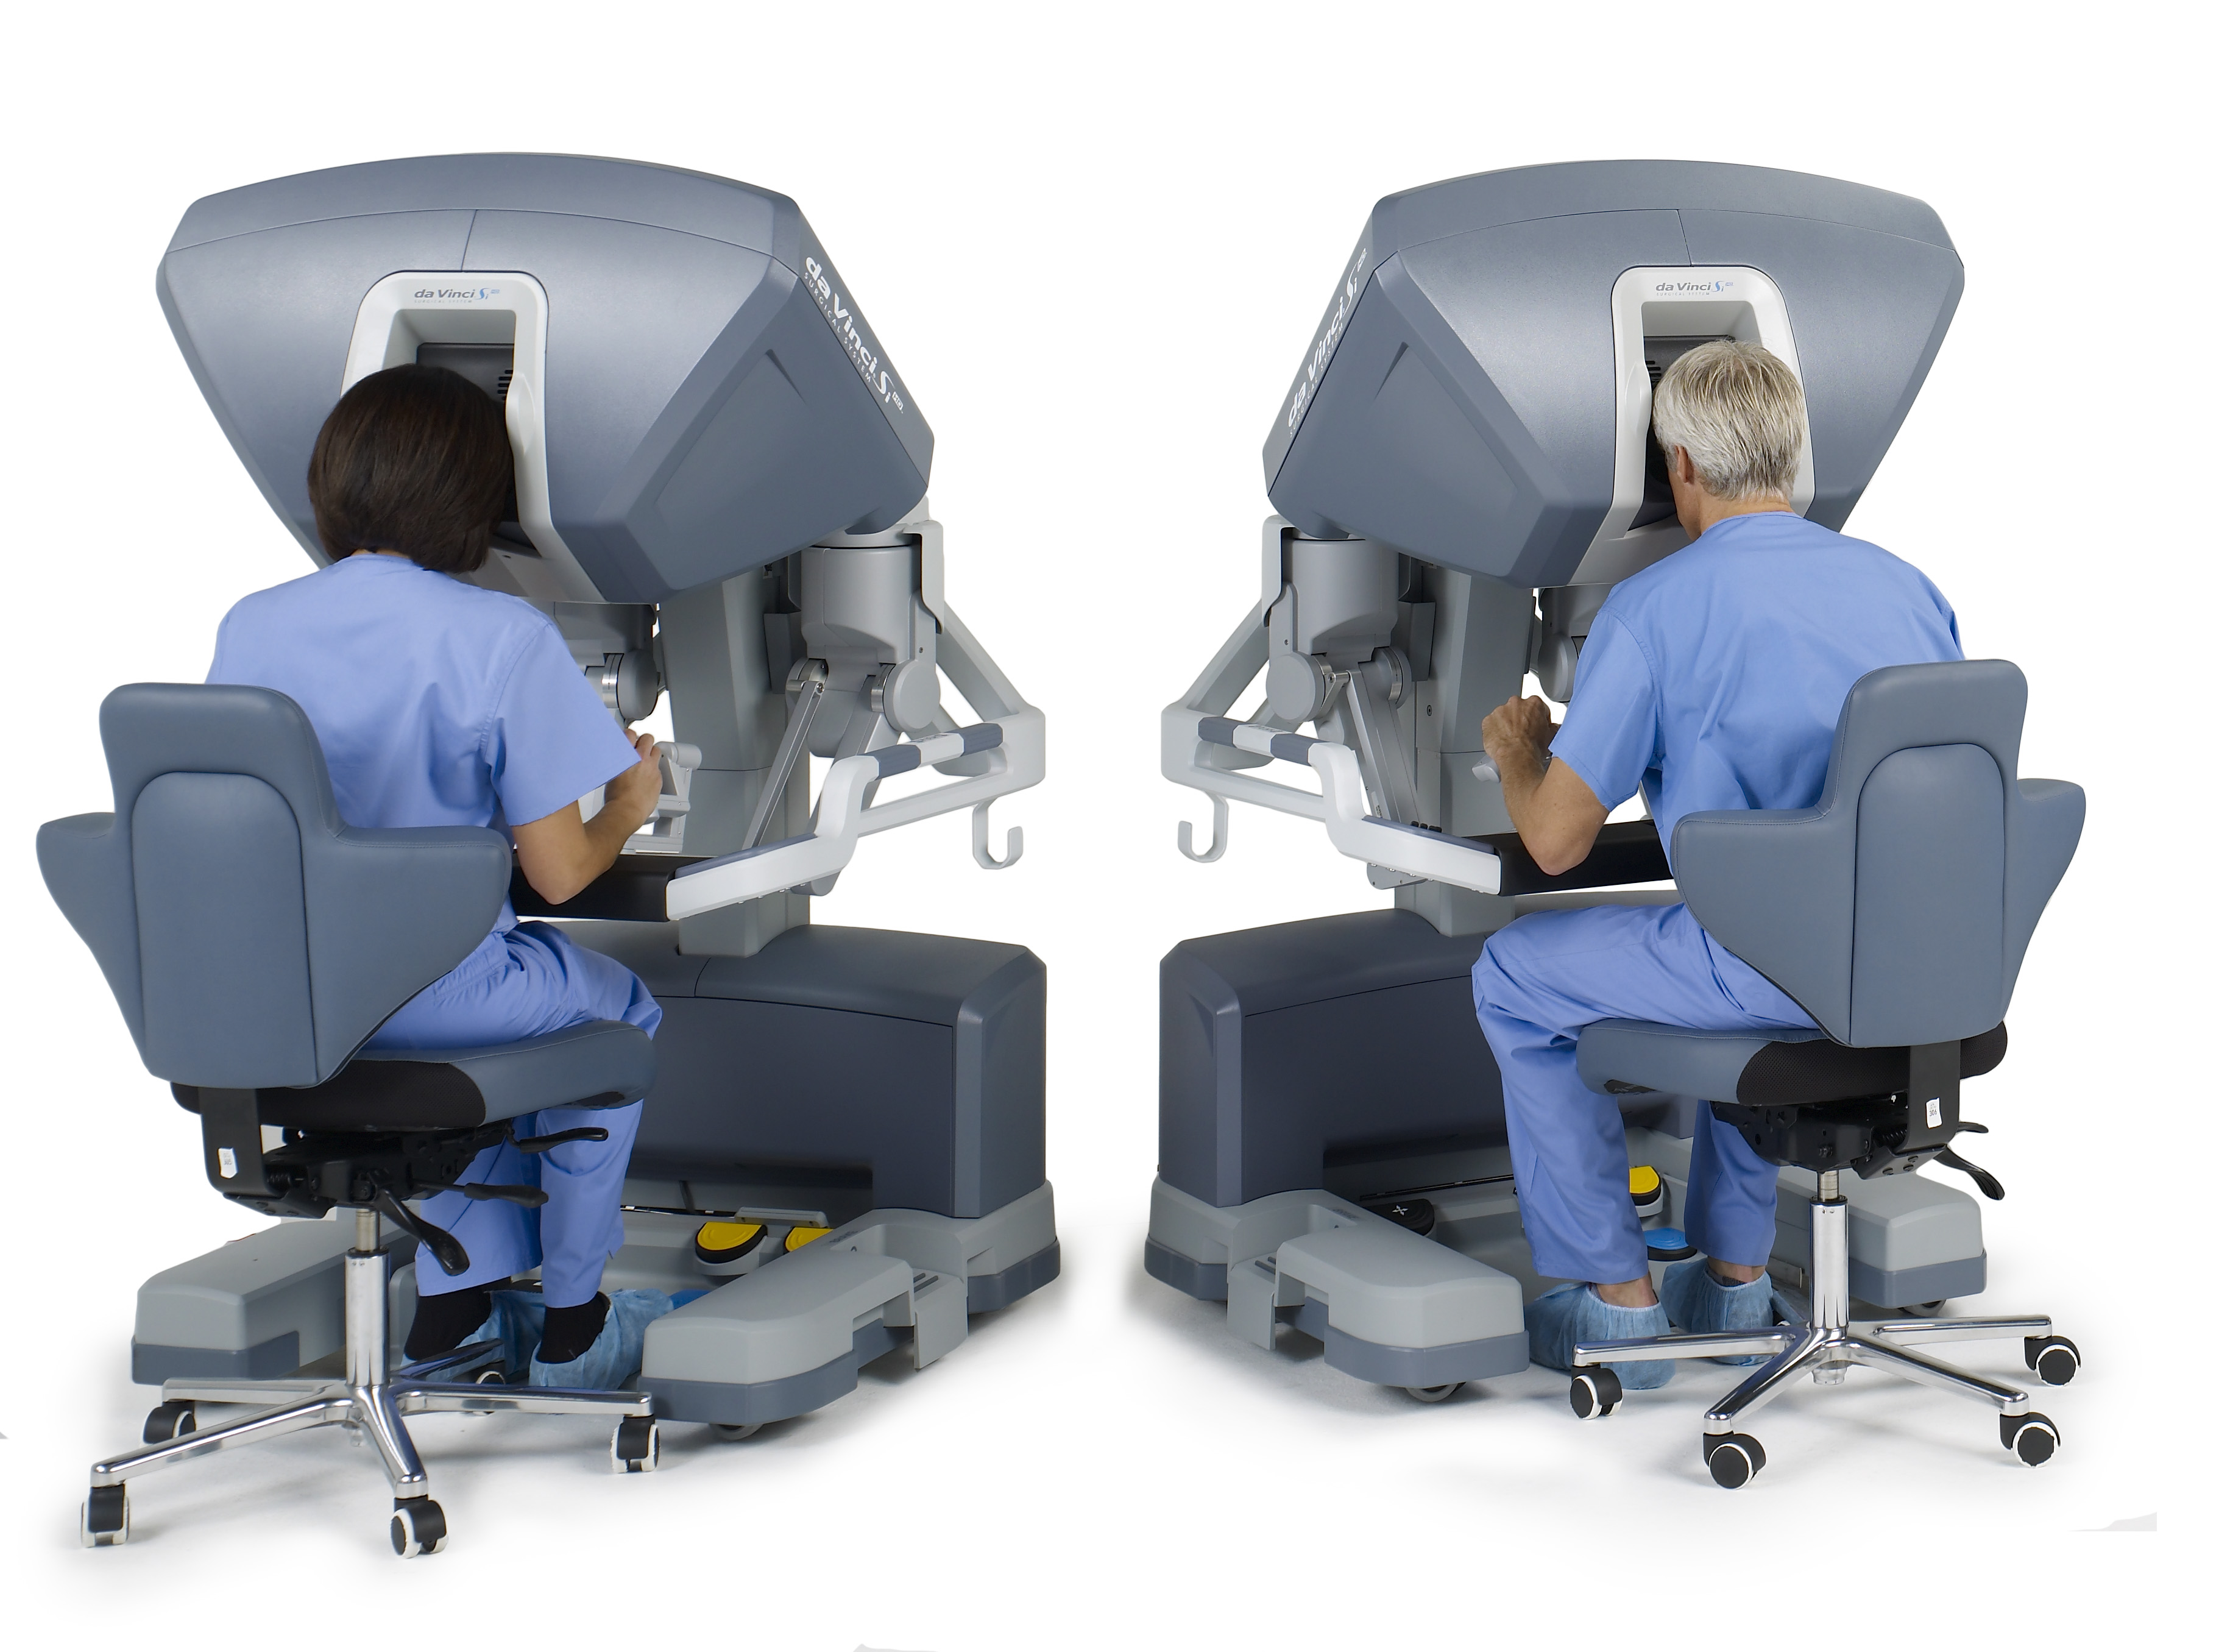 Multi-user telesurgery system: both surgeons are able to control the surgical system at the same time and over large distances. © 2014 Intuitive Surgical, Inc.